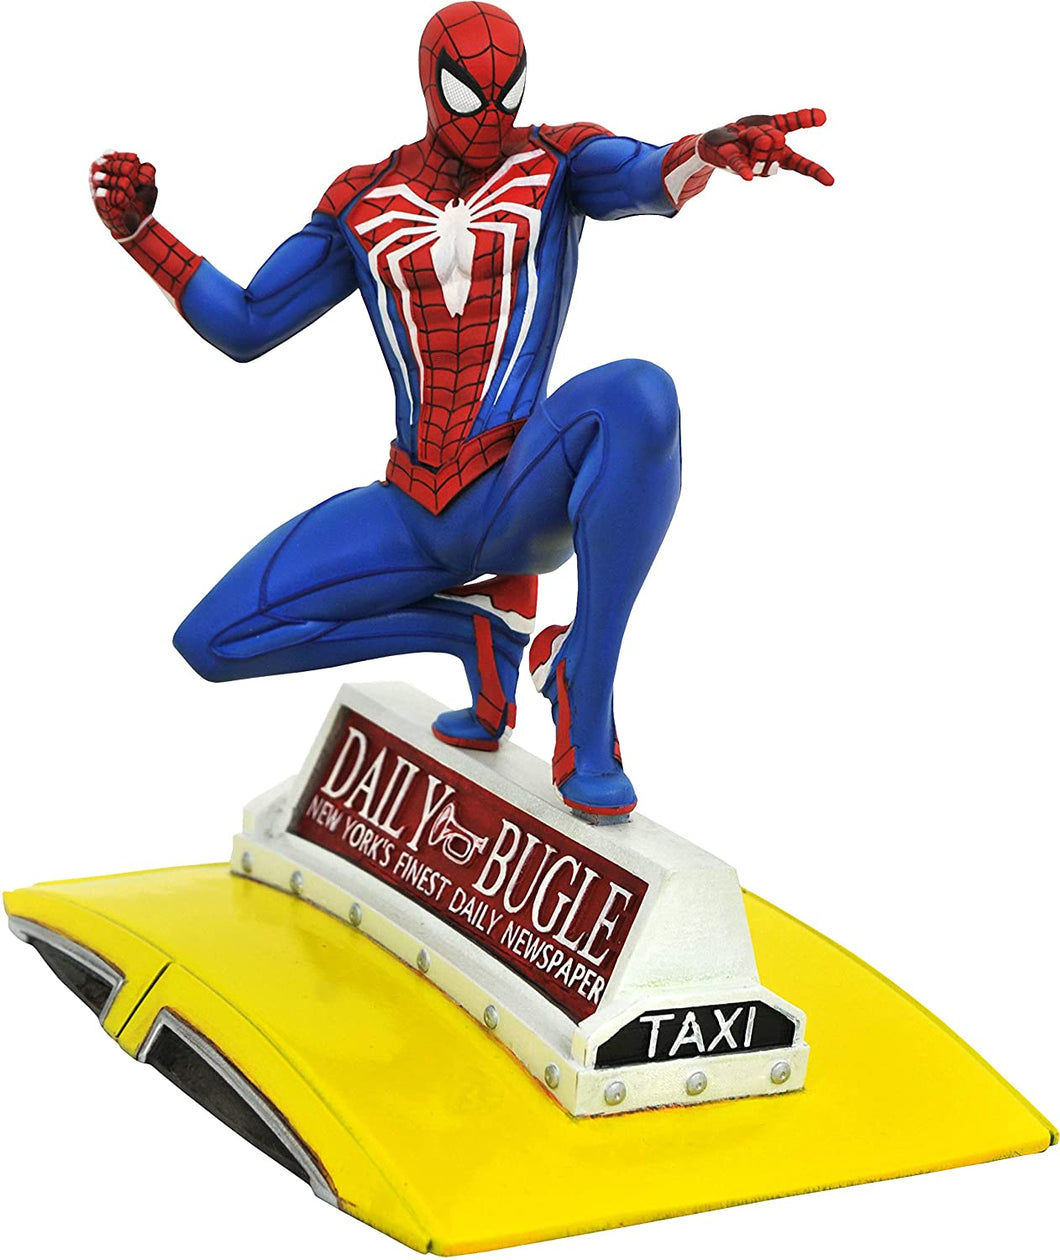 Marvel Gallery: 9-inch Multi-color Spider-Man on Taxi (Playstation 4 Version) PVC Figure